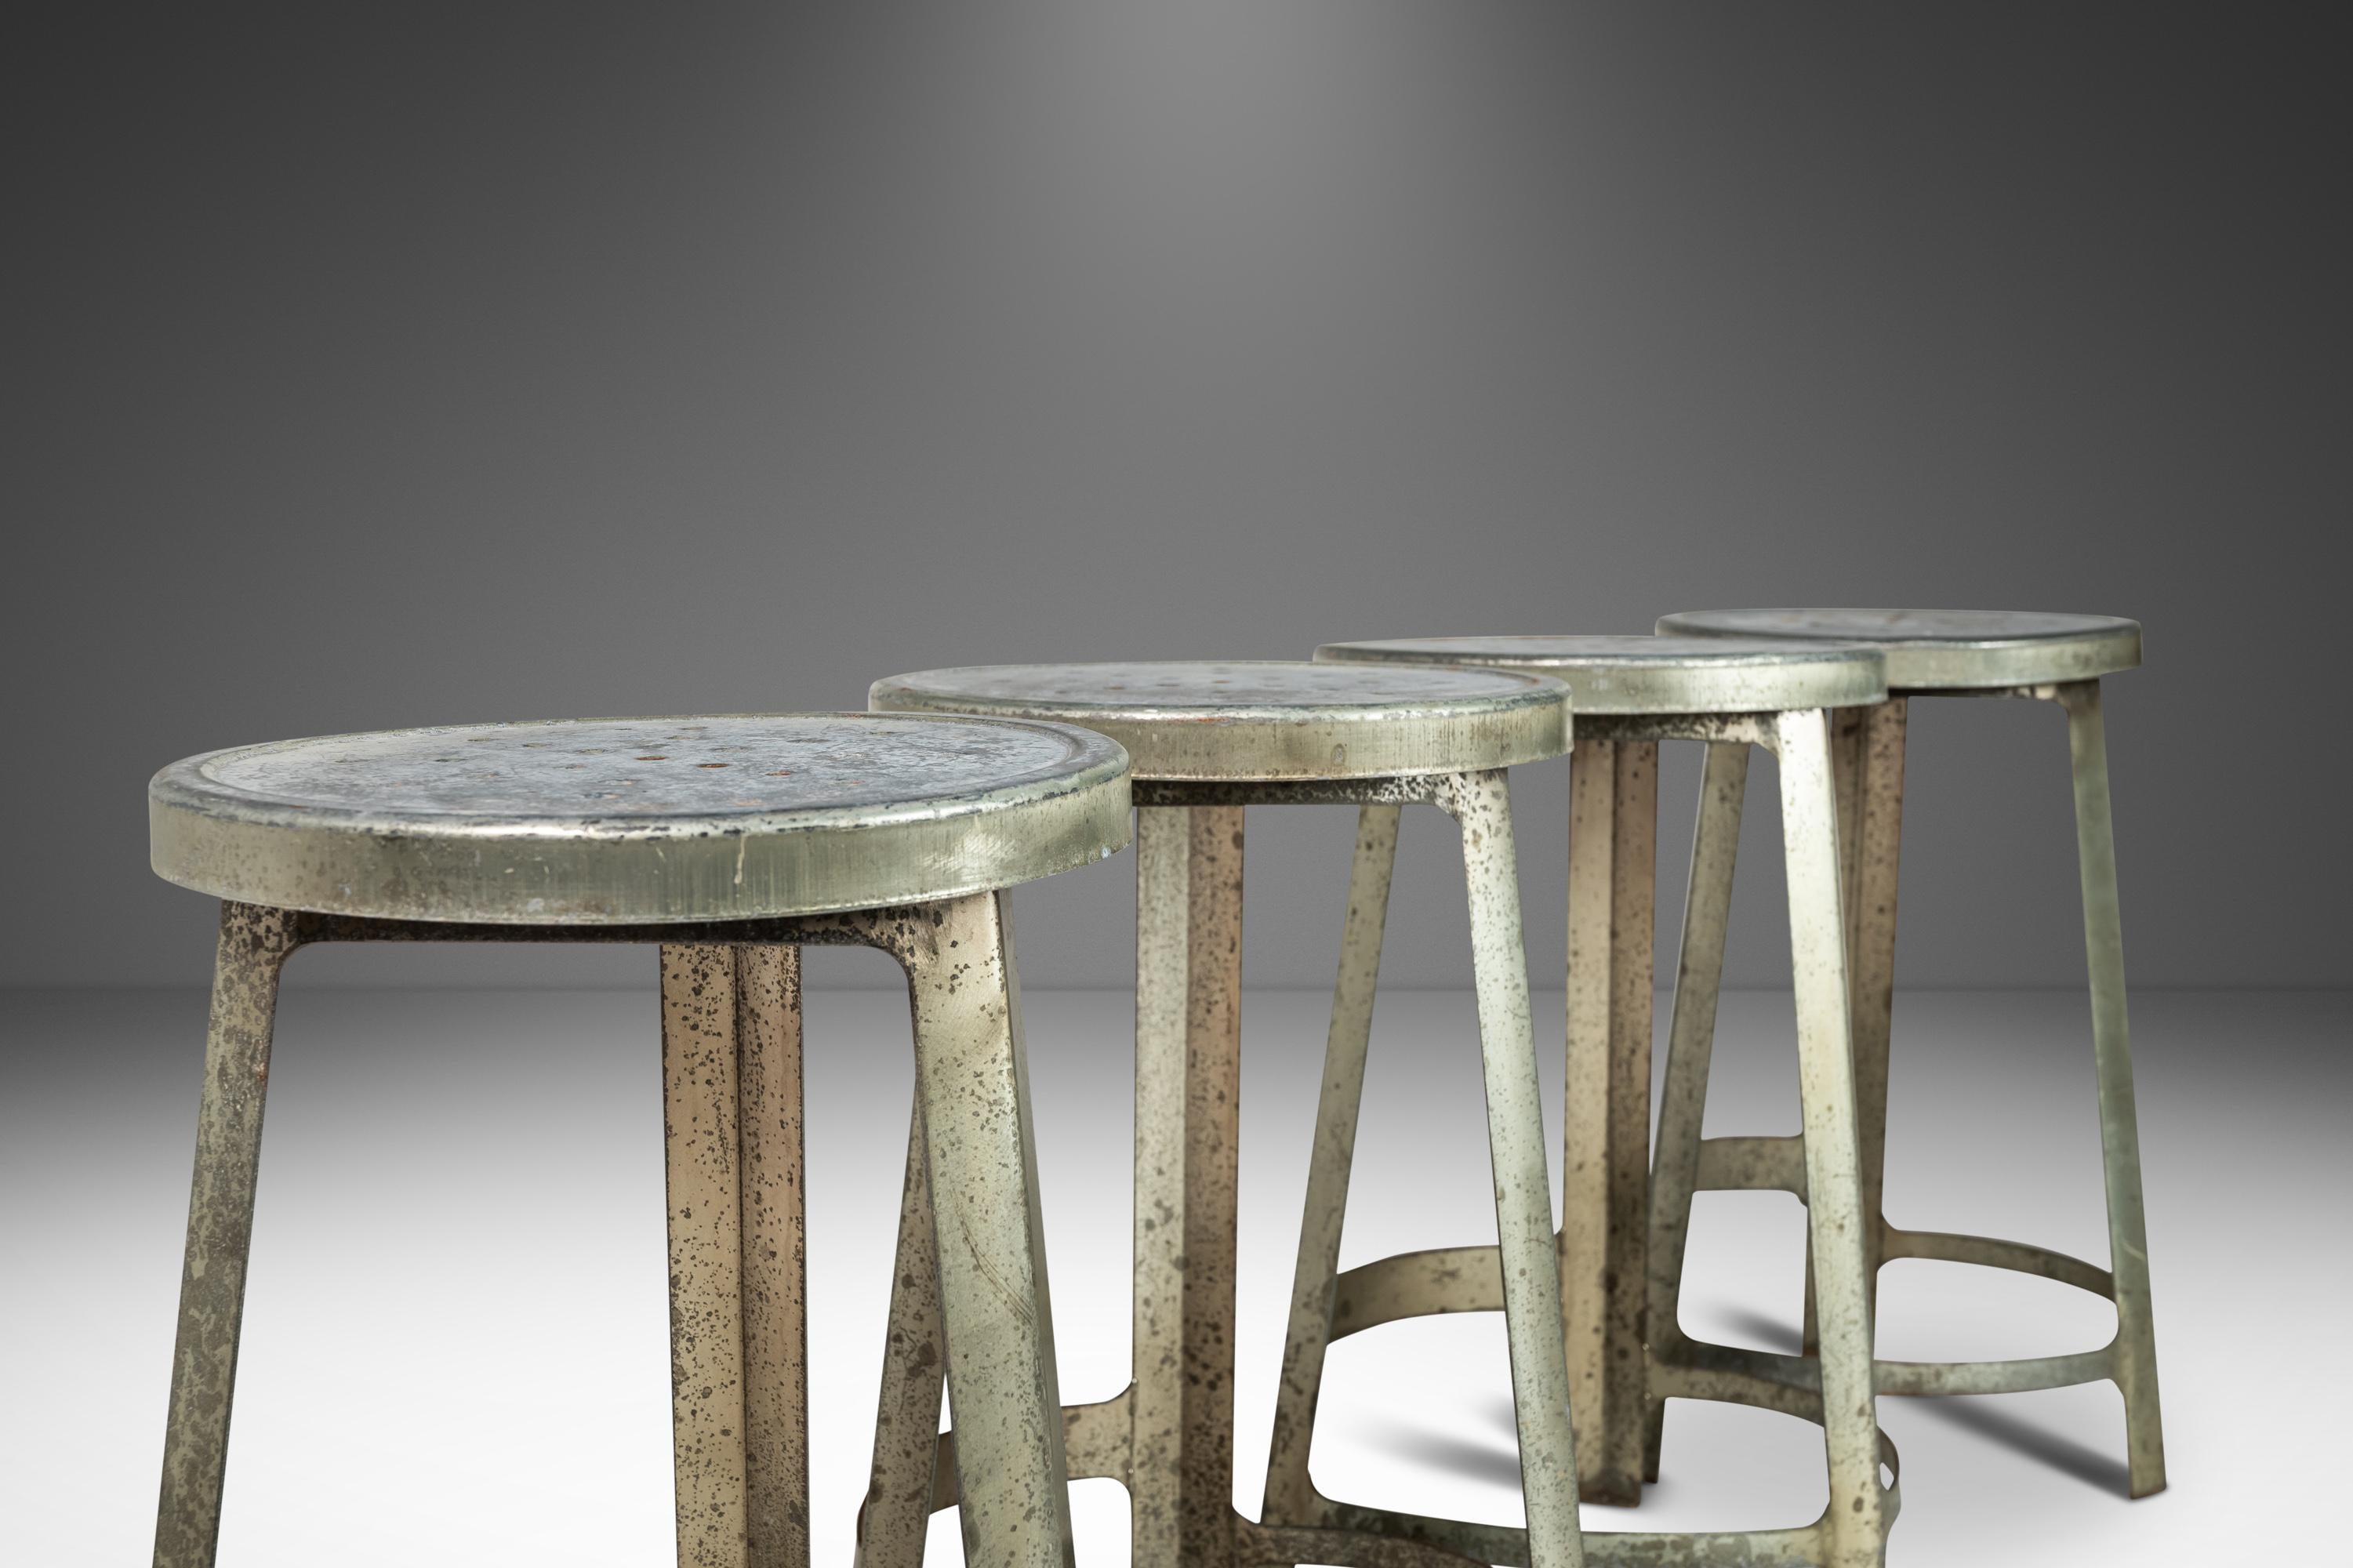 Set of Four '4' Hammered Industrial Counter Height Bar Stools, France, C. 1950s For Sale 6